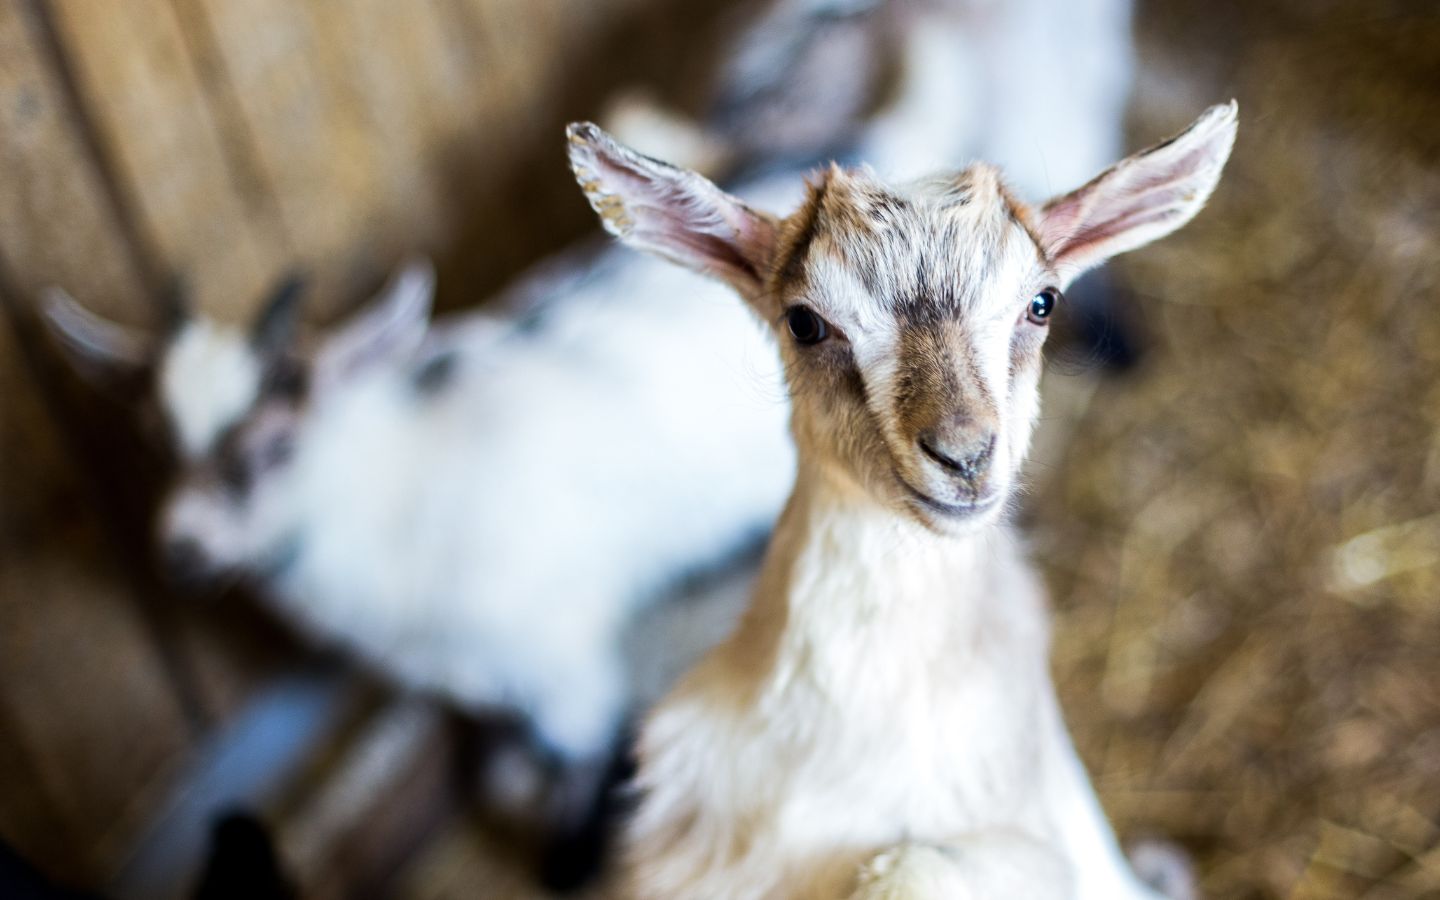 A close up of baby goat with white and brown fur and big ears and another white and brown baby goat in the background